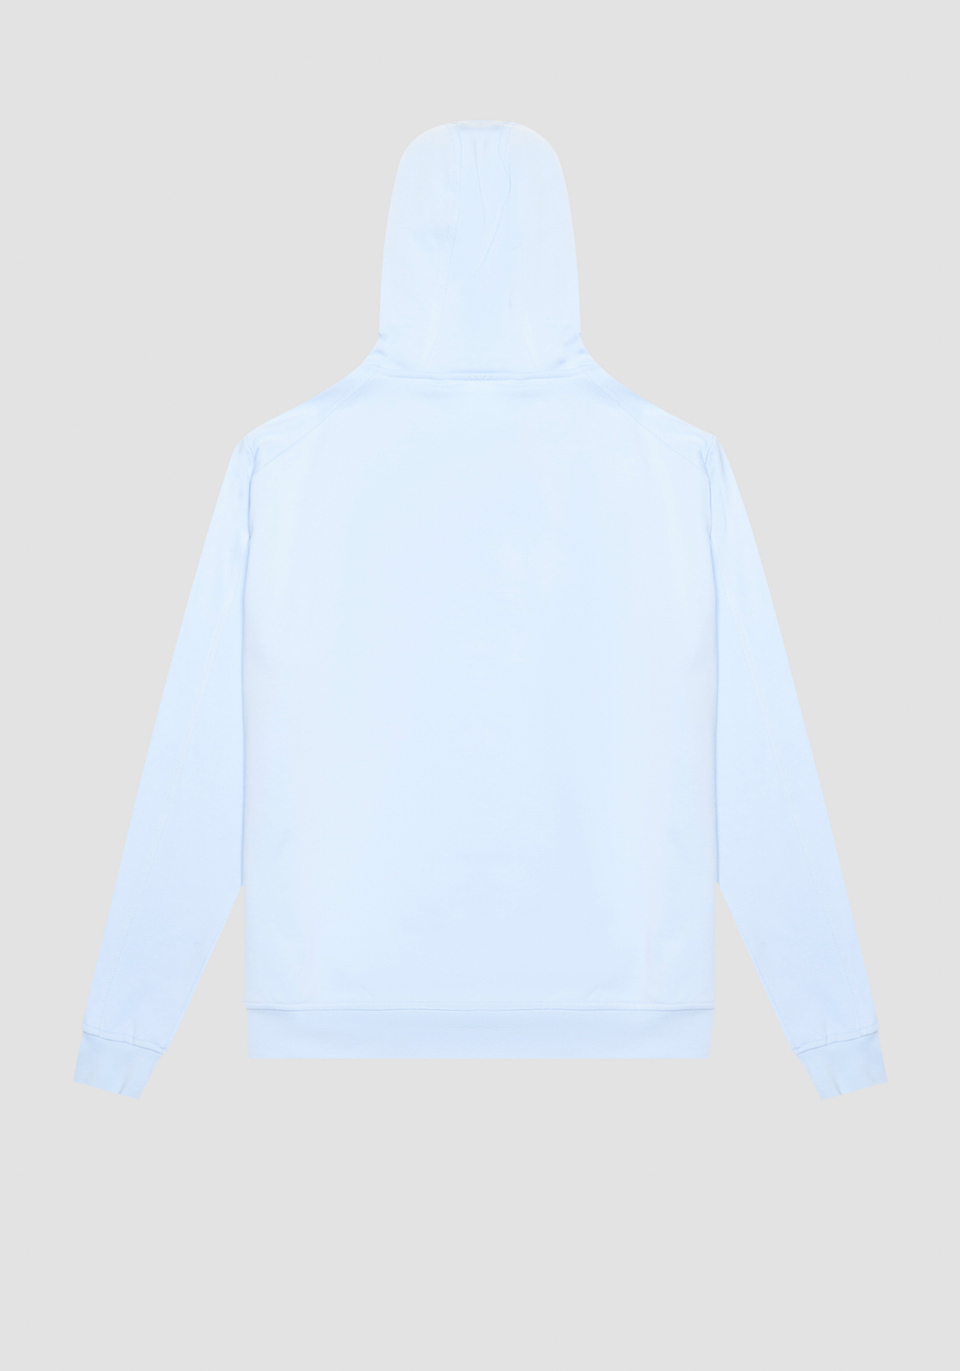 REGULAR FIT SWEATSHIRT IN SUSTAINABLE COTTON-POLYESTER STRETCH FABRIC WITH HOODIE - Antony Morato Online Shop